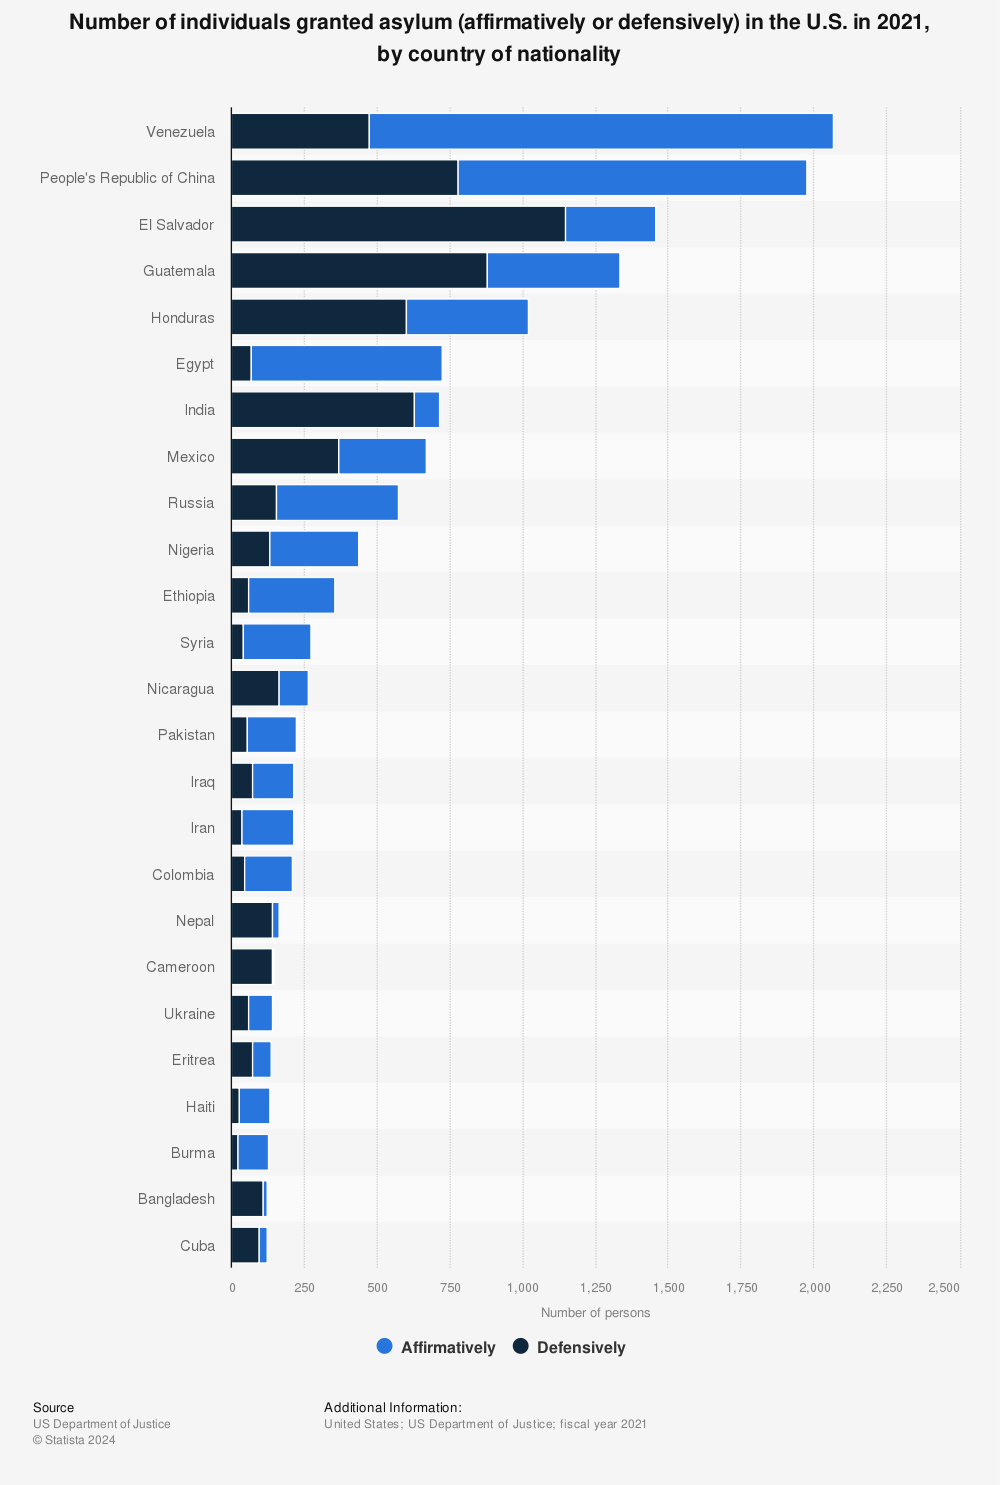 Statistic: Number of individuals granted asylum (affirmatively or defensively) in the U.S. in 2020, by country of nationality | Statista